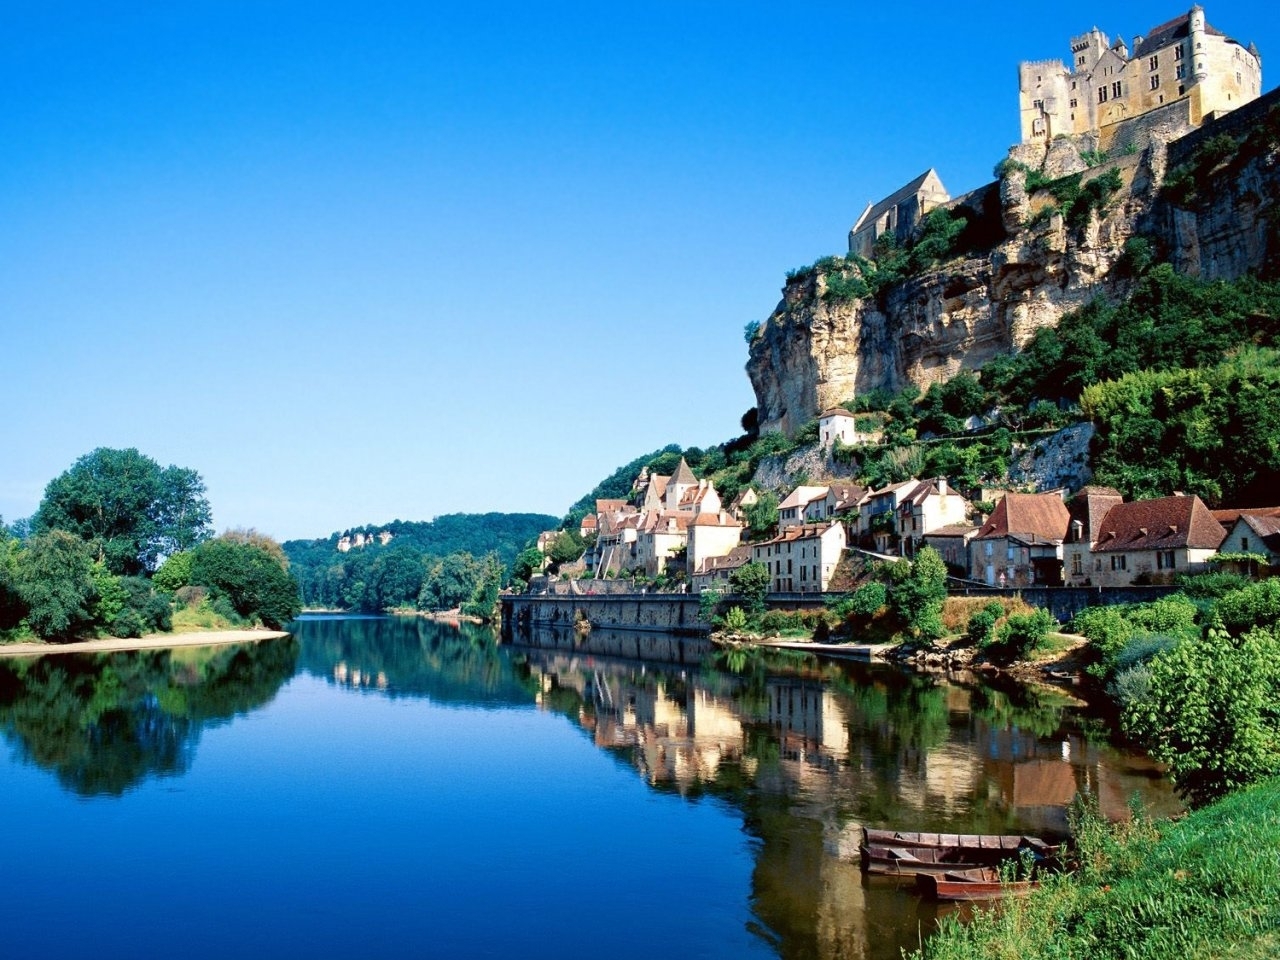 cities, landscape, houses, rivers, mountains, blue download HD wallpaper